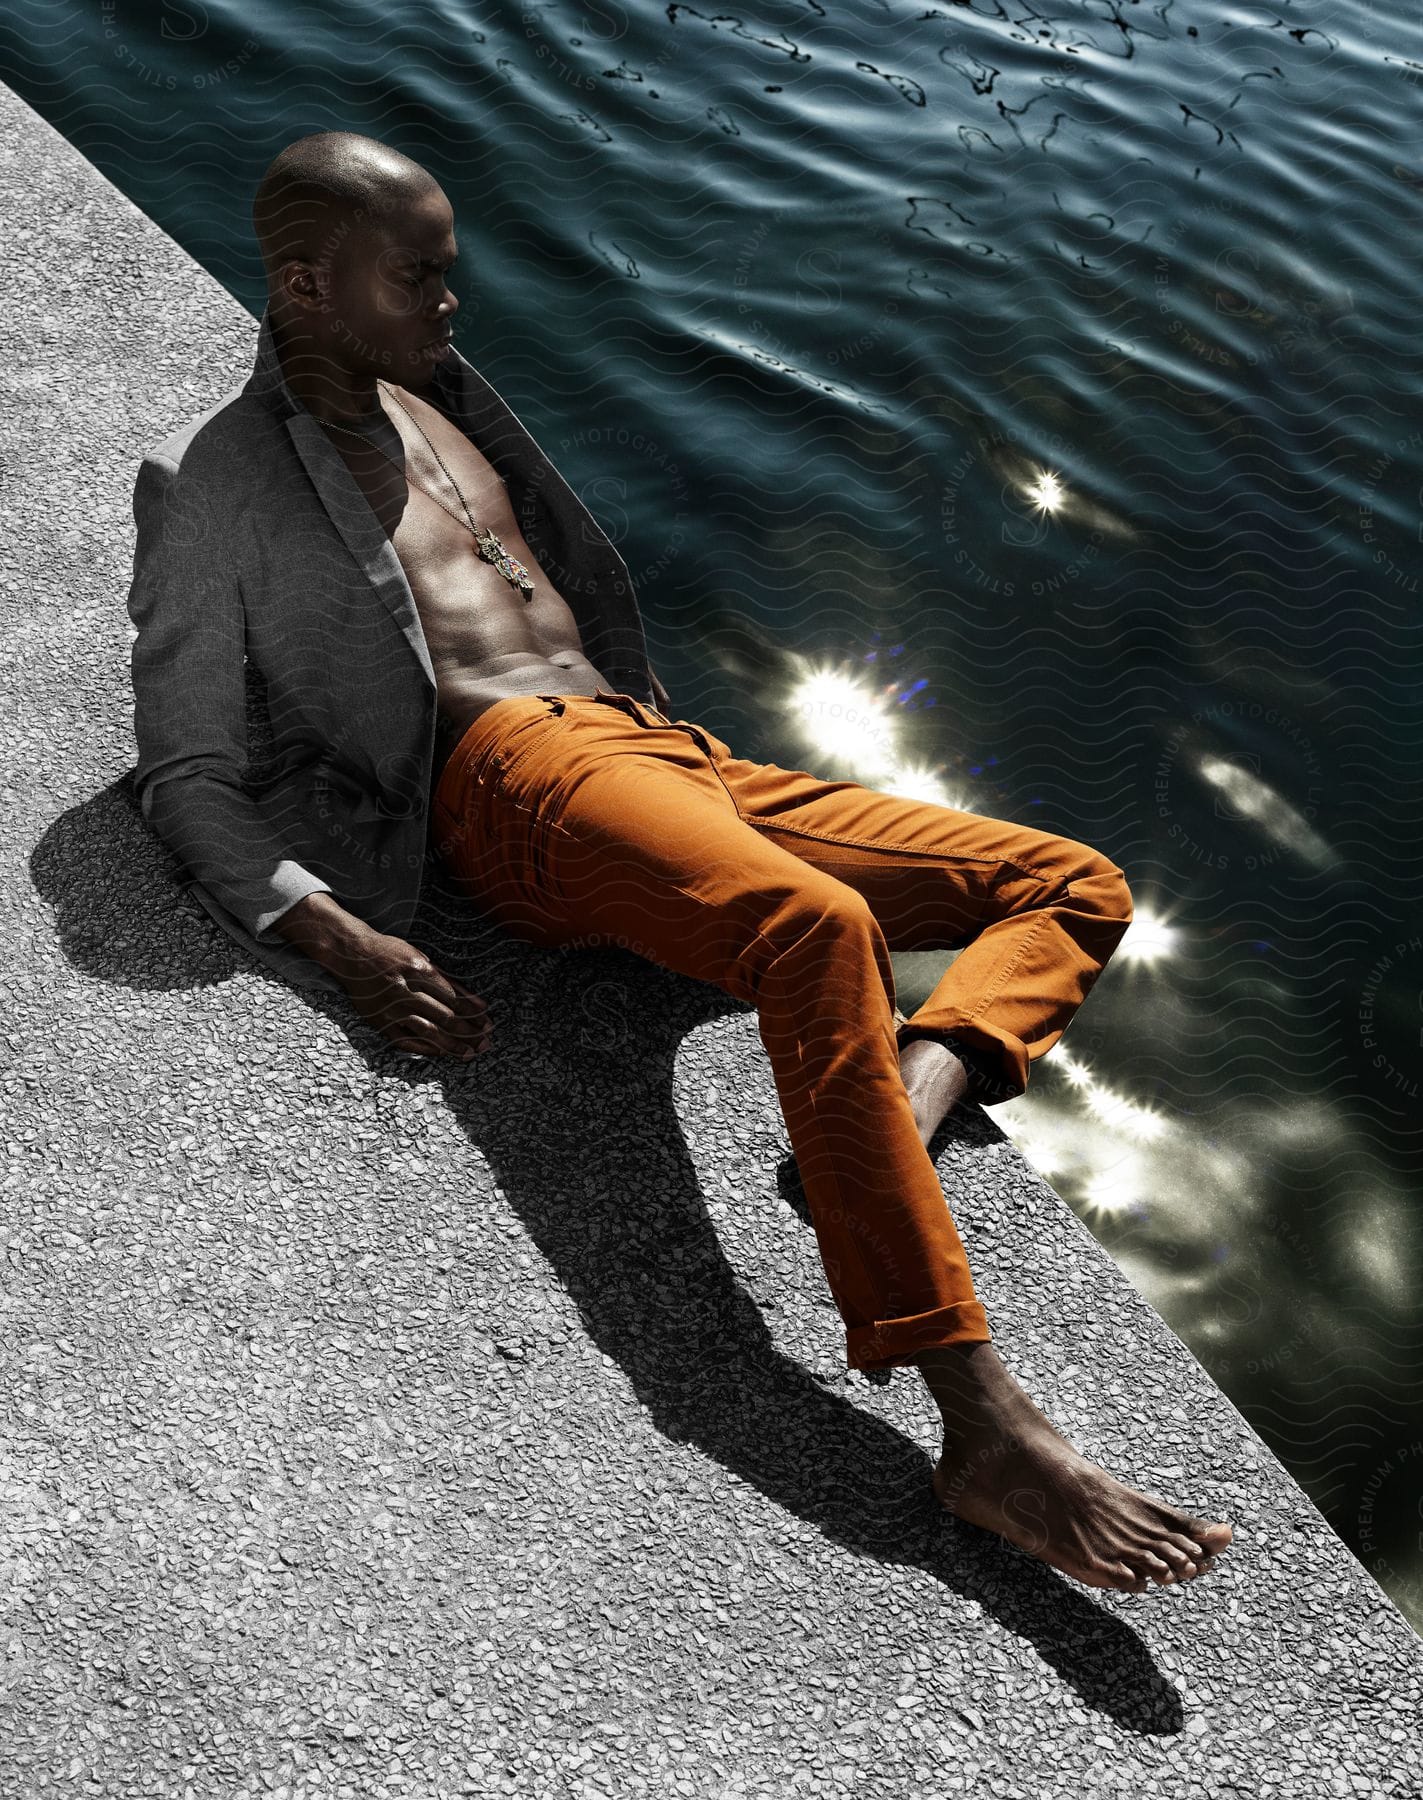 A male model posing for a photo on a sunny day next to water on a granite floor